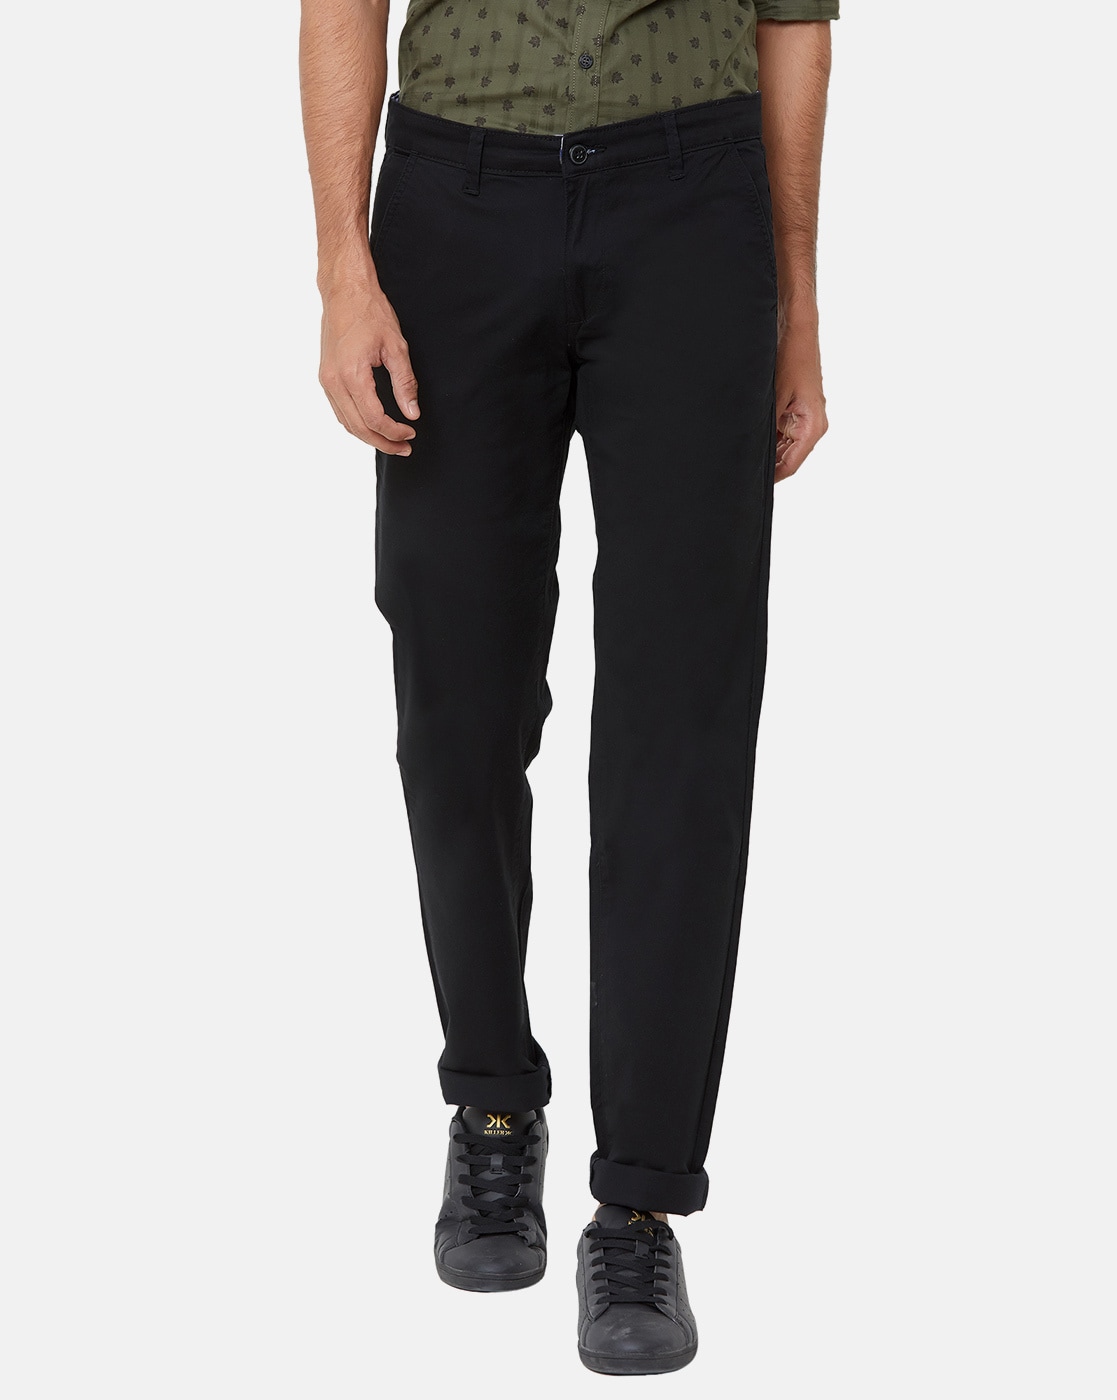 Buy Louis Philippe Black Trousers Online  693396  Louis Philippe